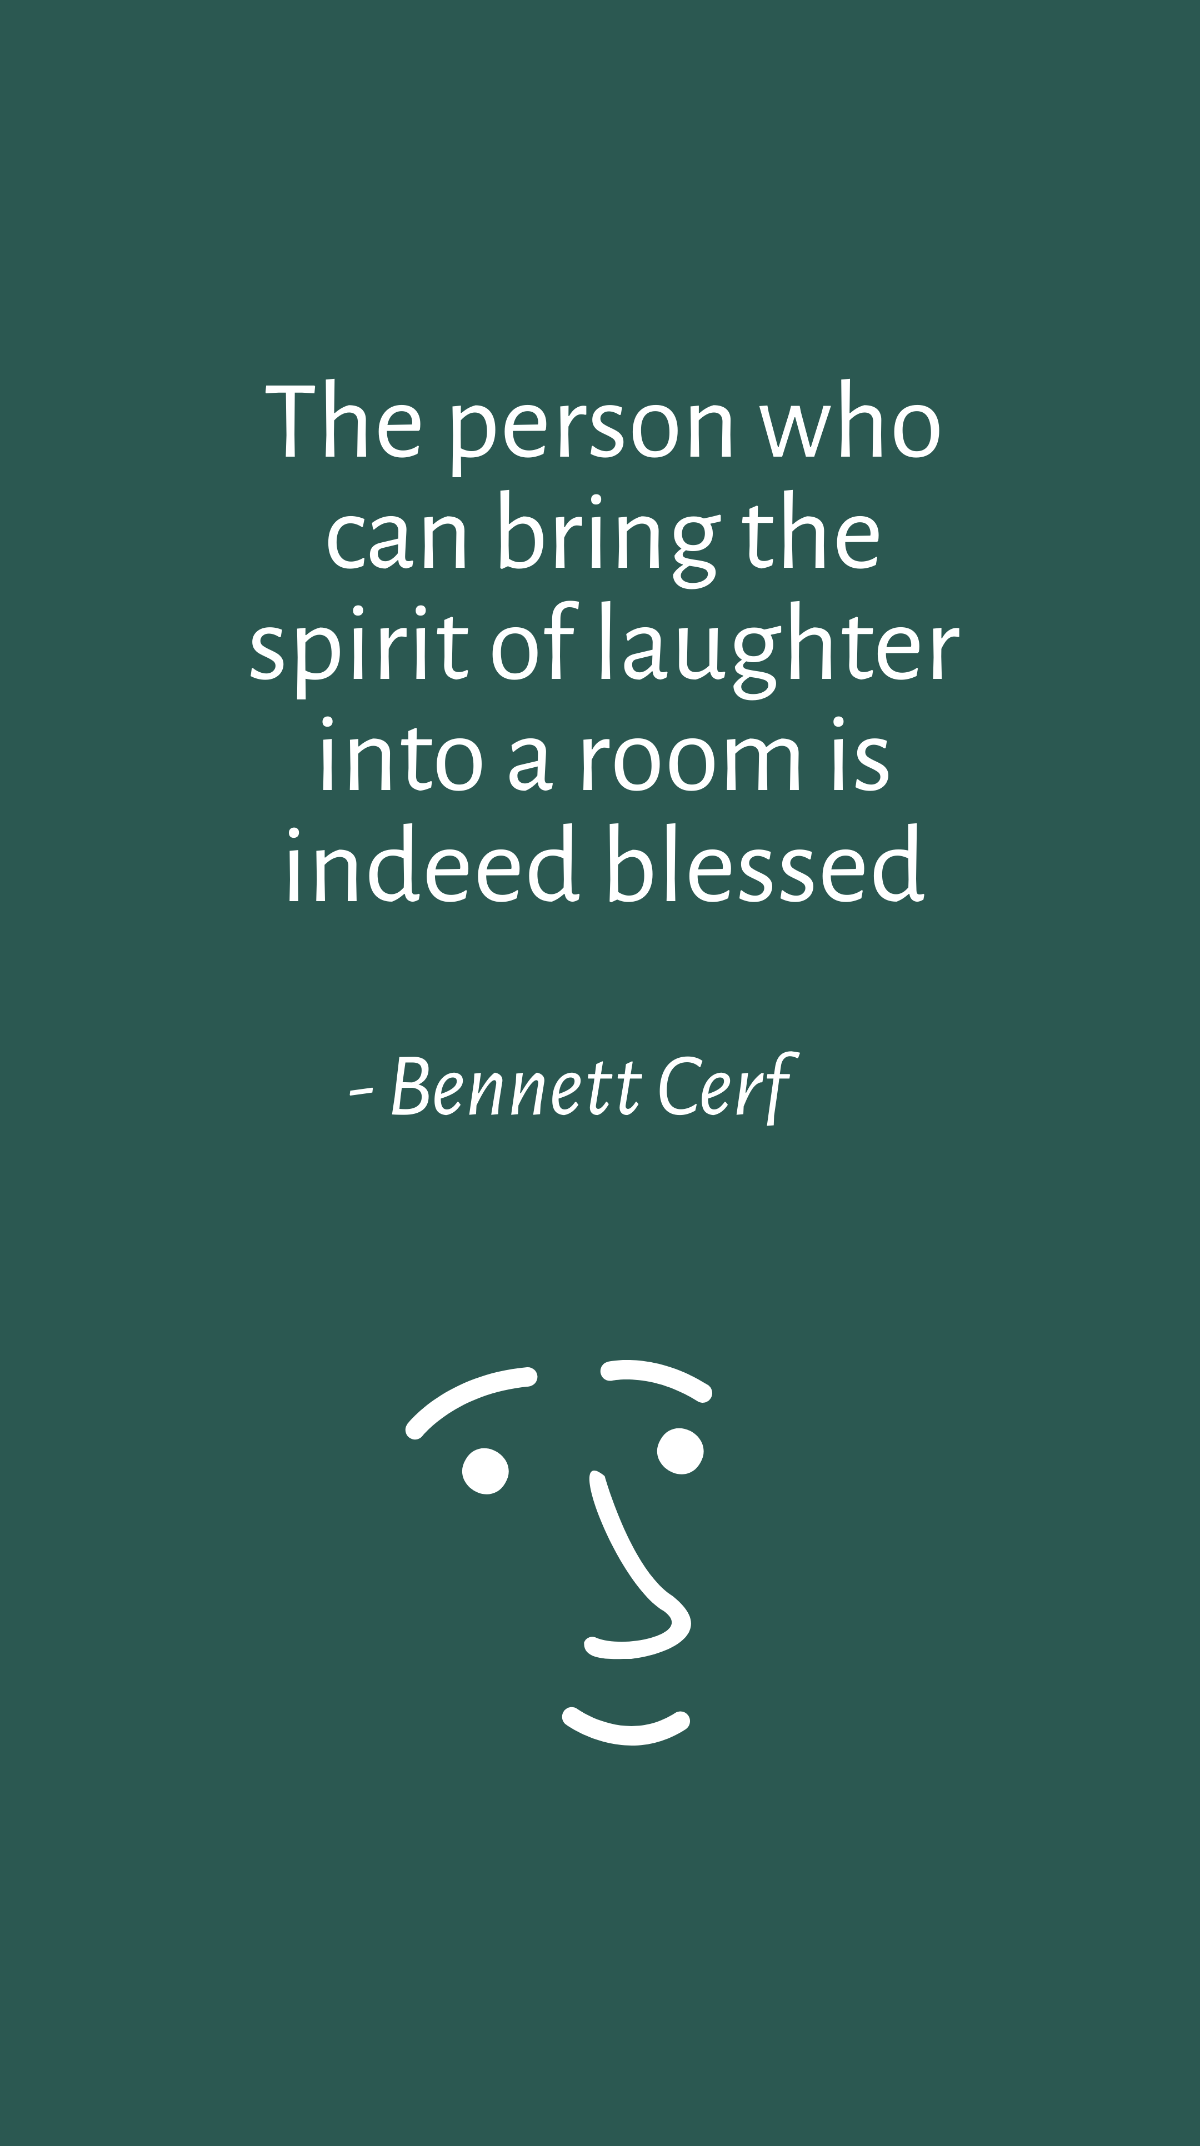 Bennett Cerf - The person who can bring the spirit of laughter into a room is indeed blessed